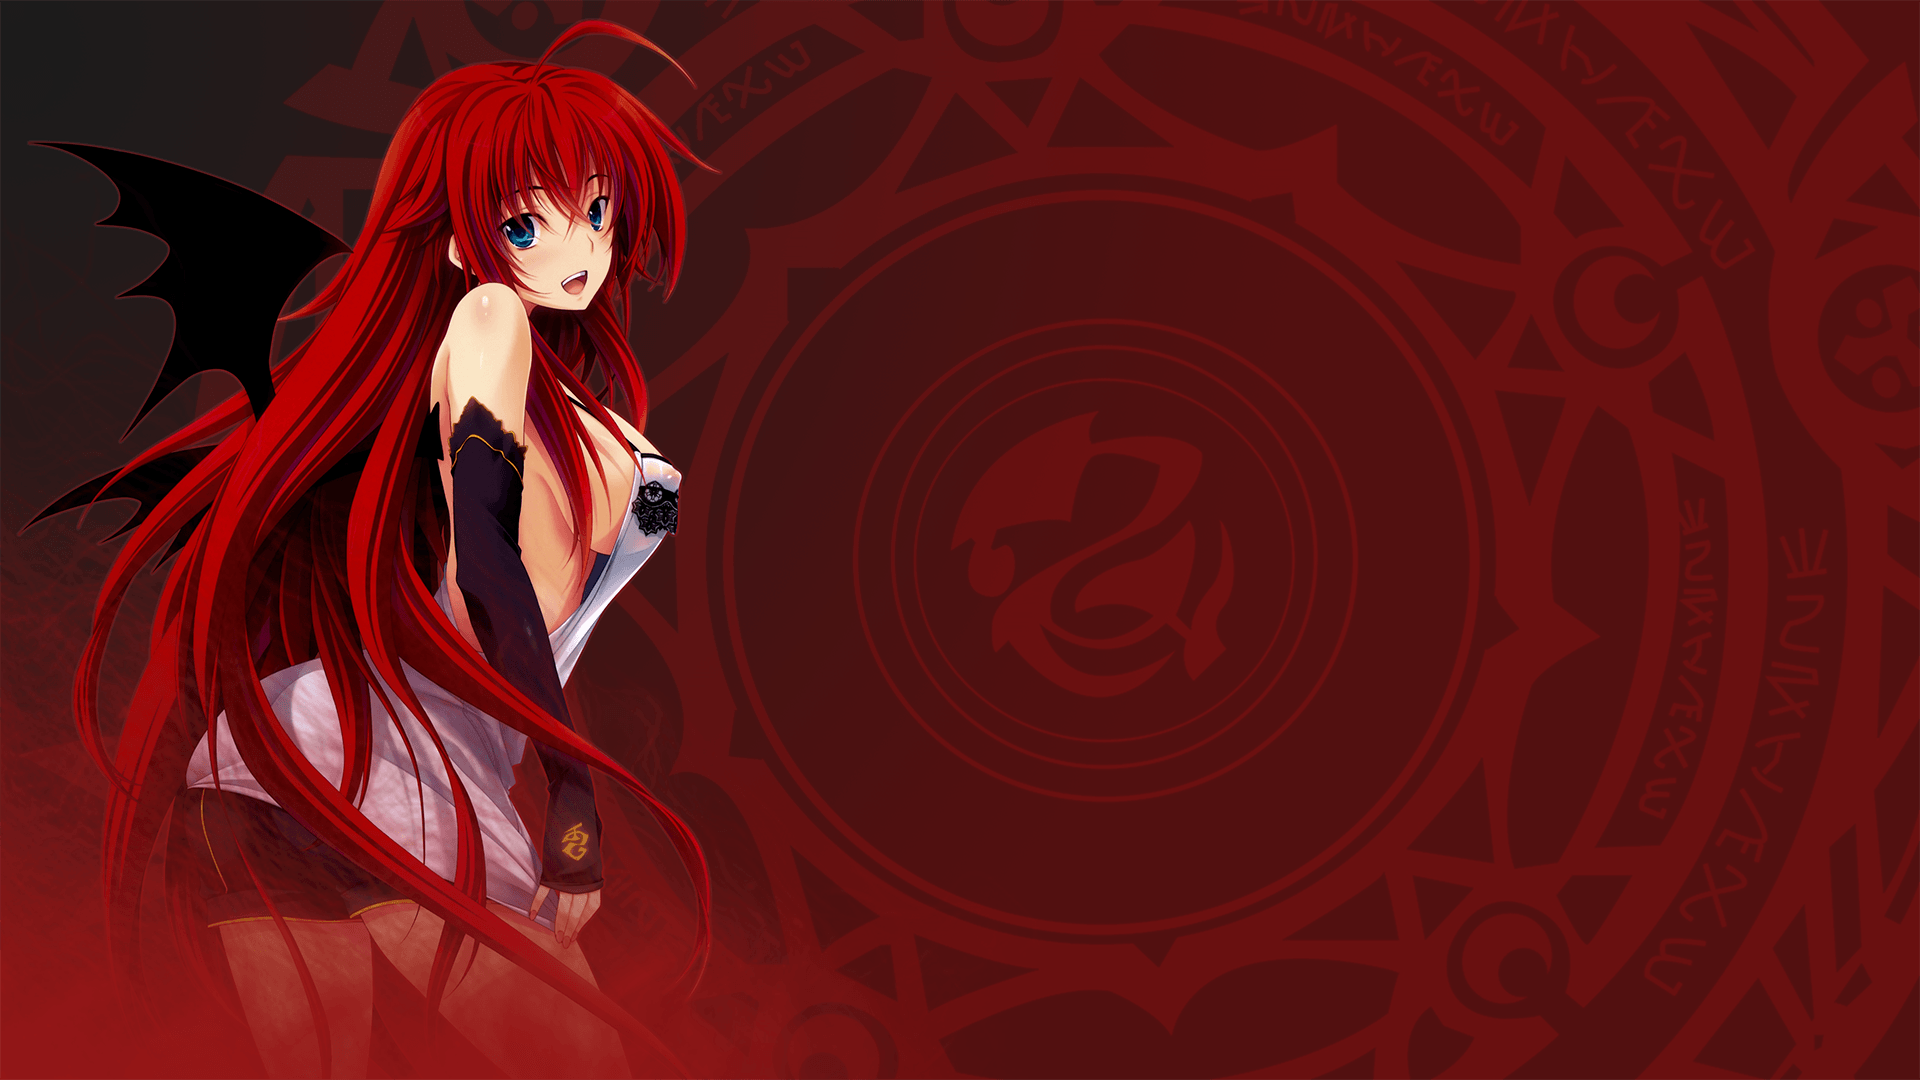 Since the Wallpaper Friday got invented, here is my Rias Gremory